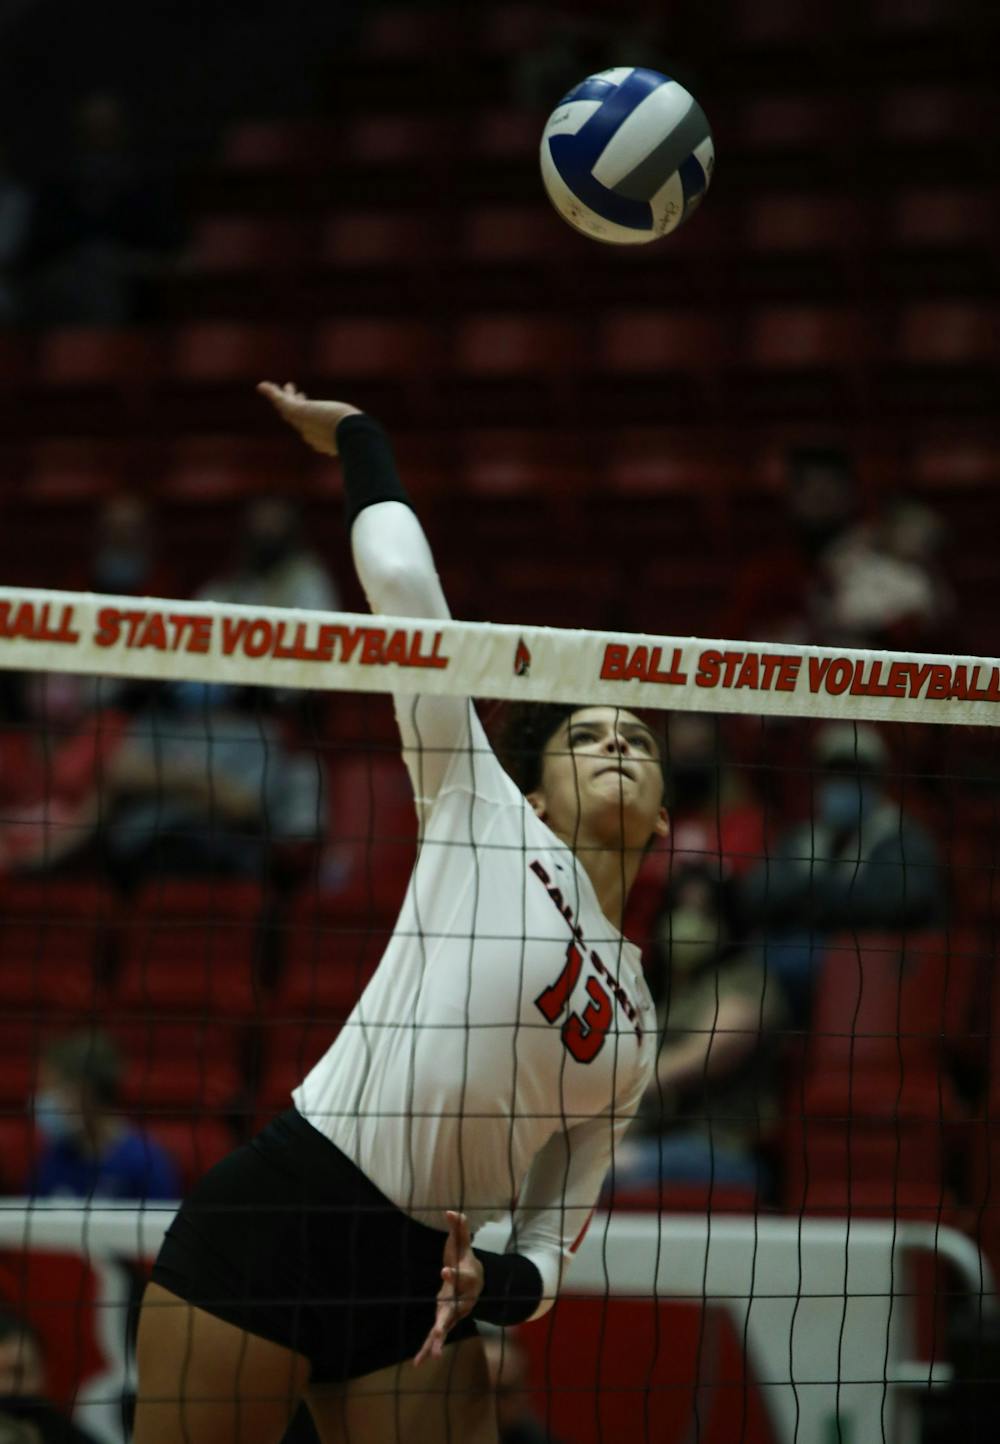 Ball State ends regular season with most wins in country